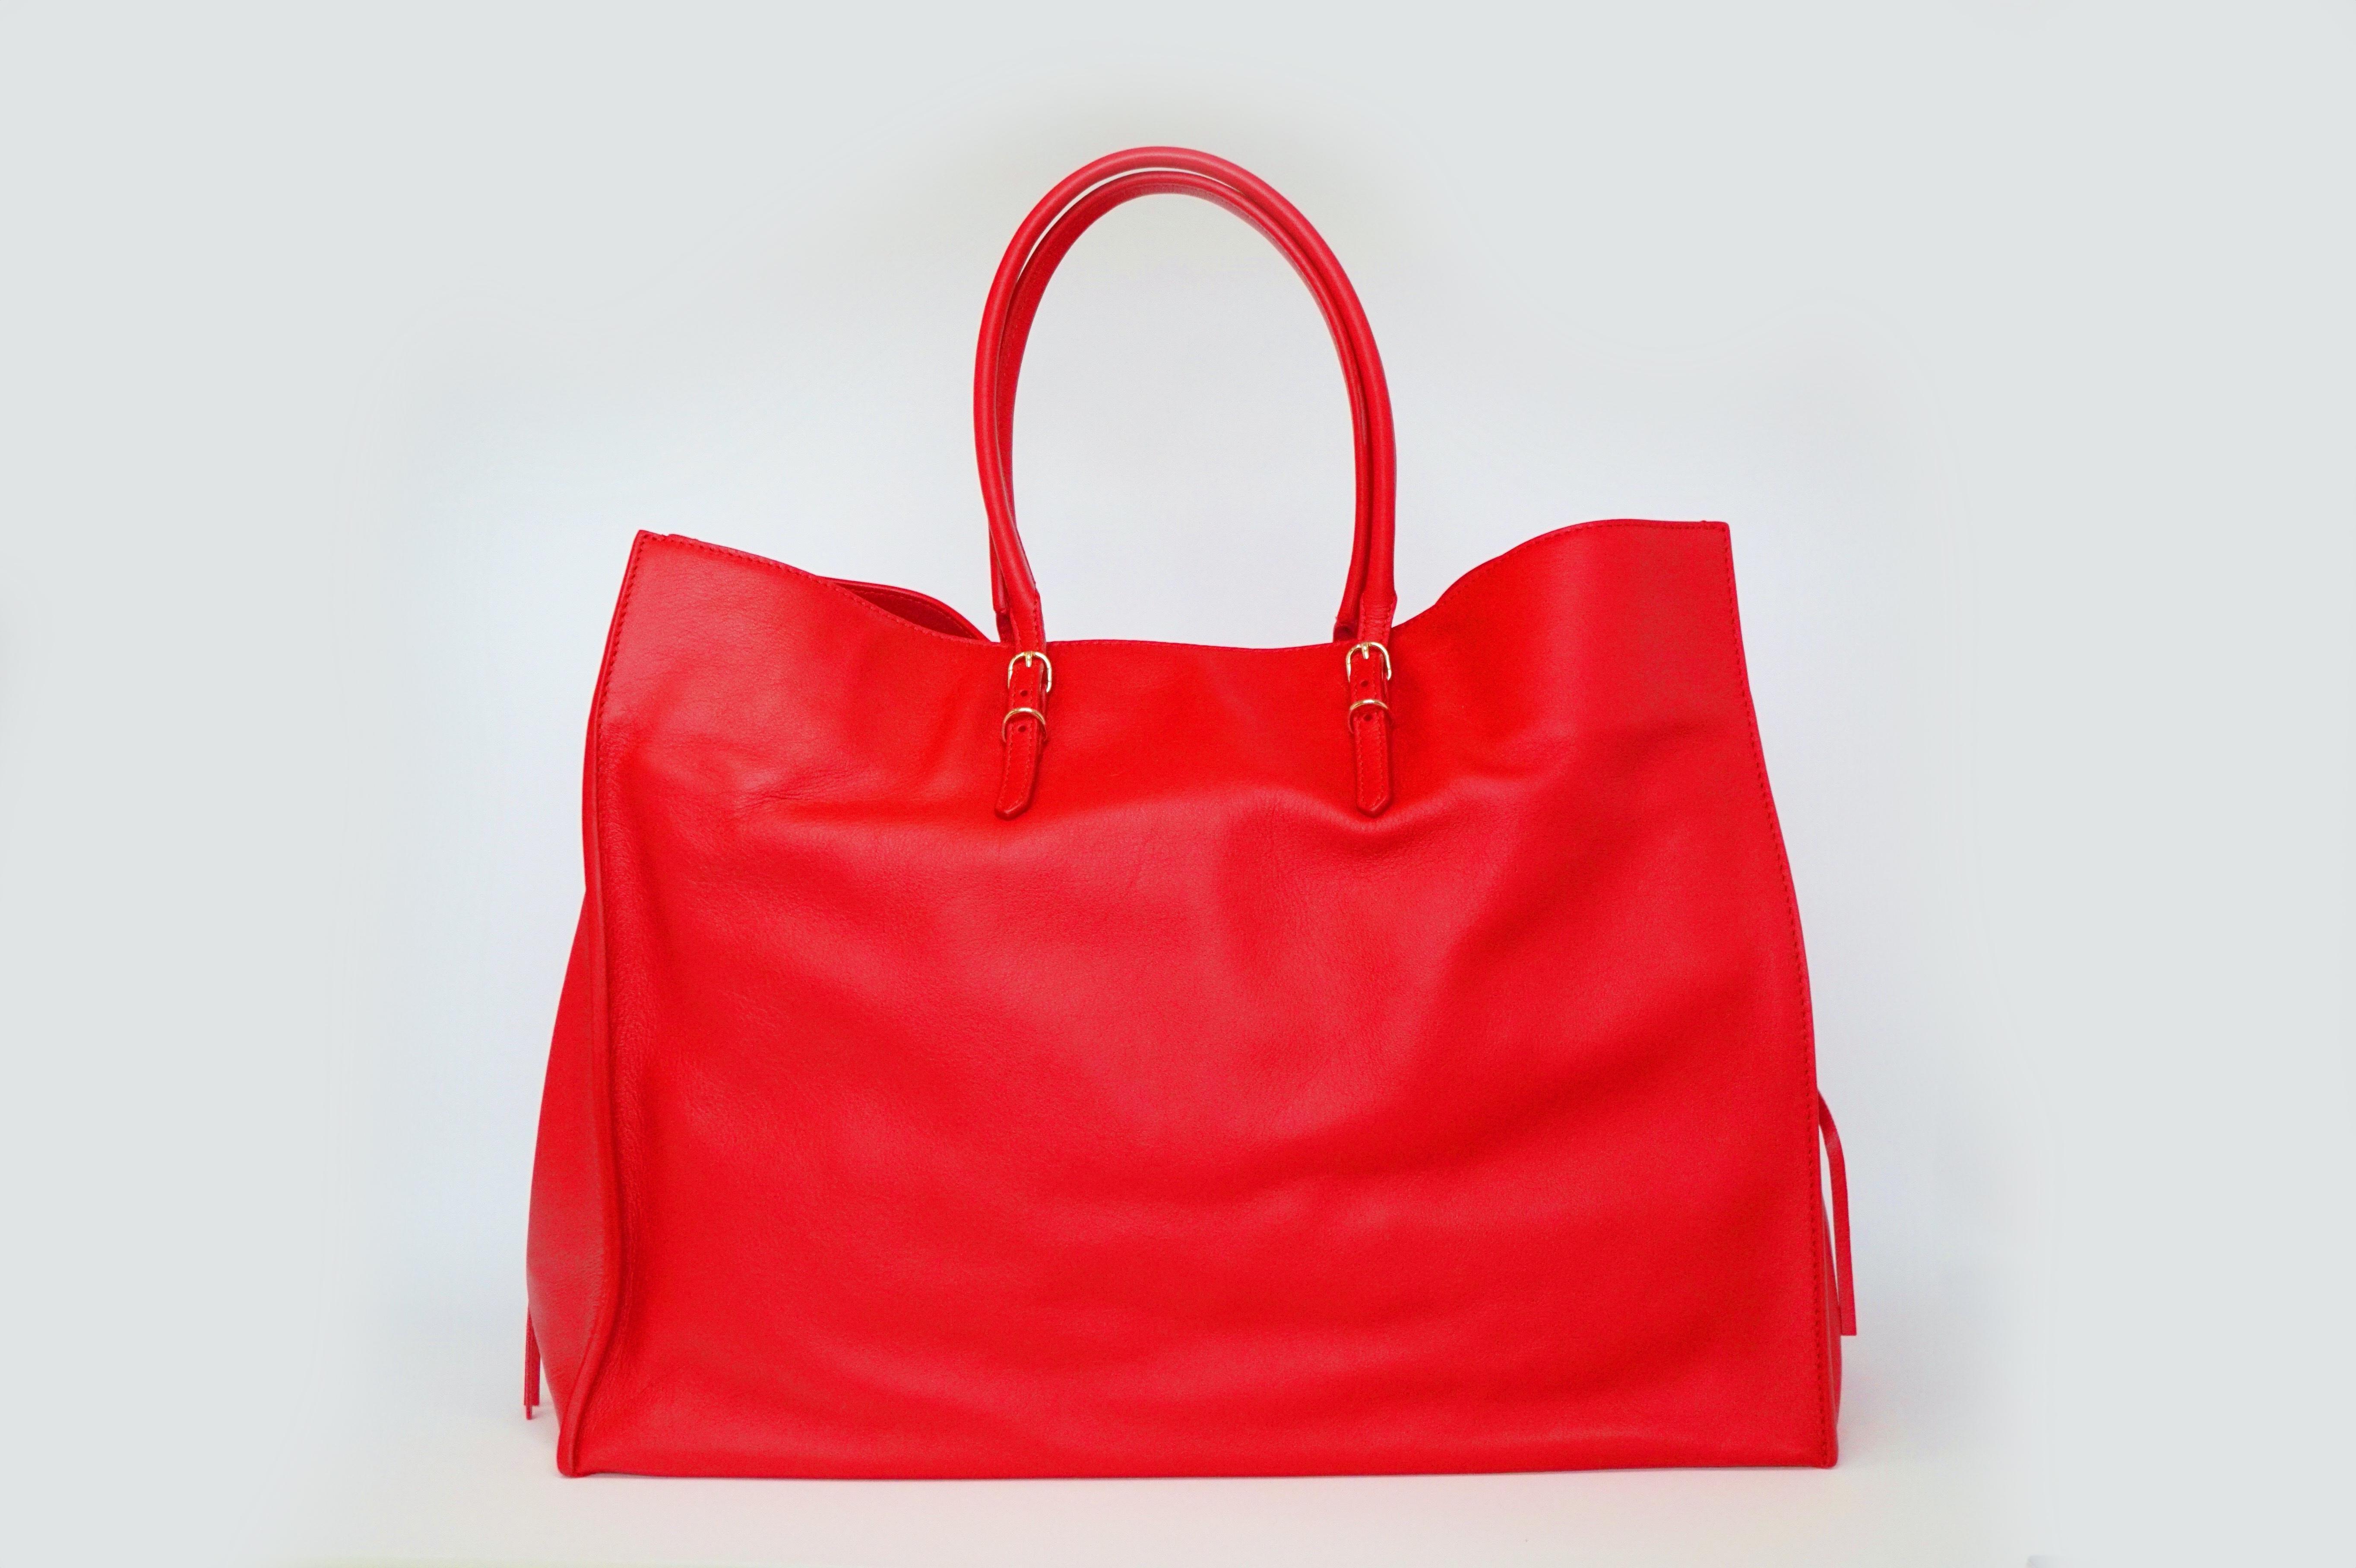 Balenciaga Papier A4 Zip-Around Tote in Red Calfskin Leather, Fall/Winter 2016   2